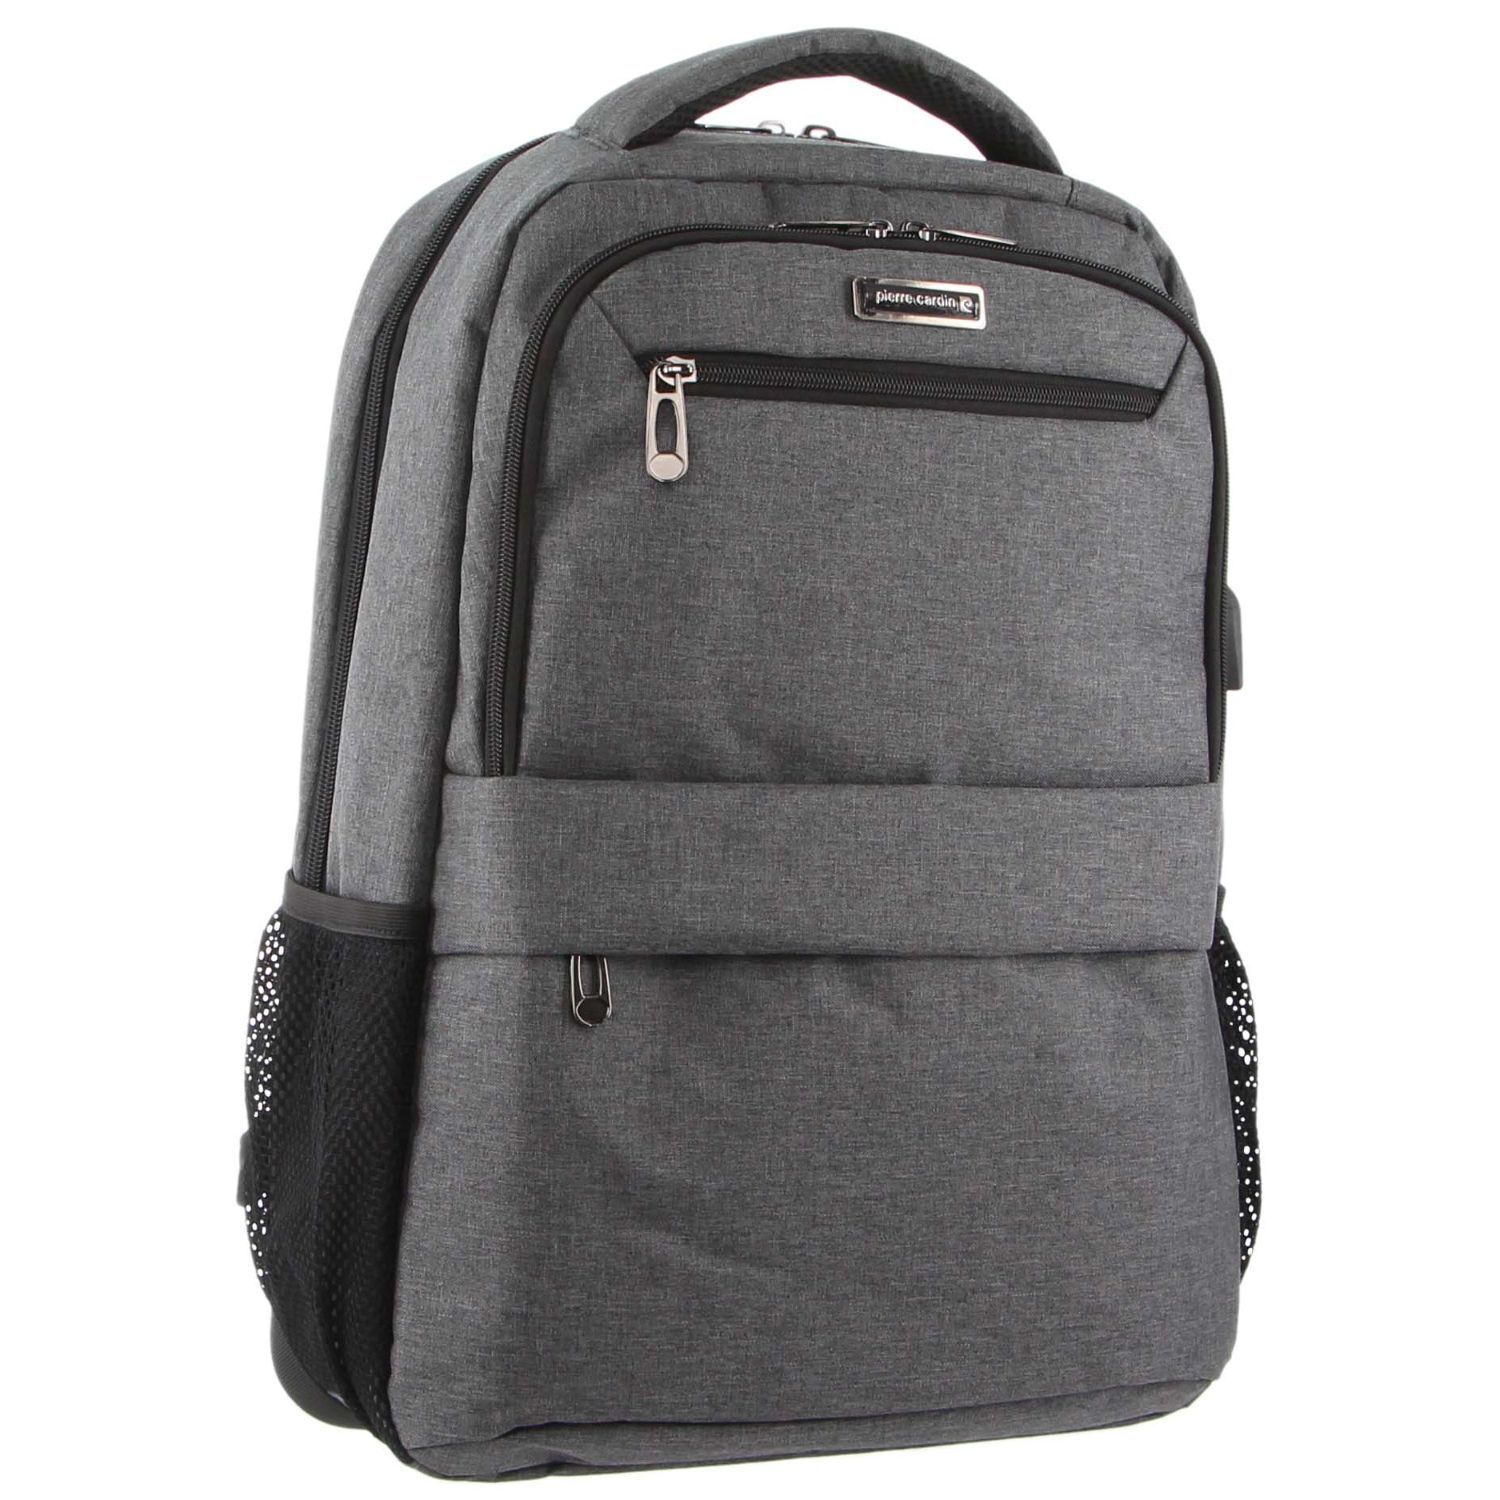 Pierre Cardin USB & RFID Travel & Business Laptop Backpack - PC3179